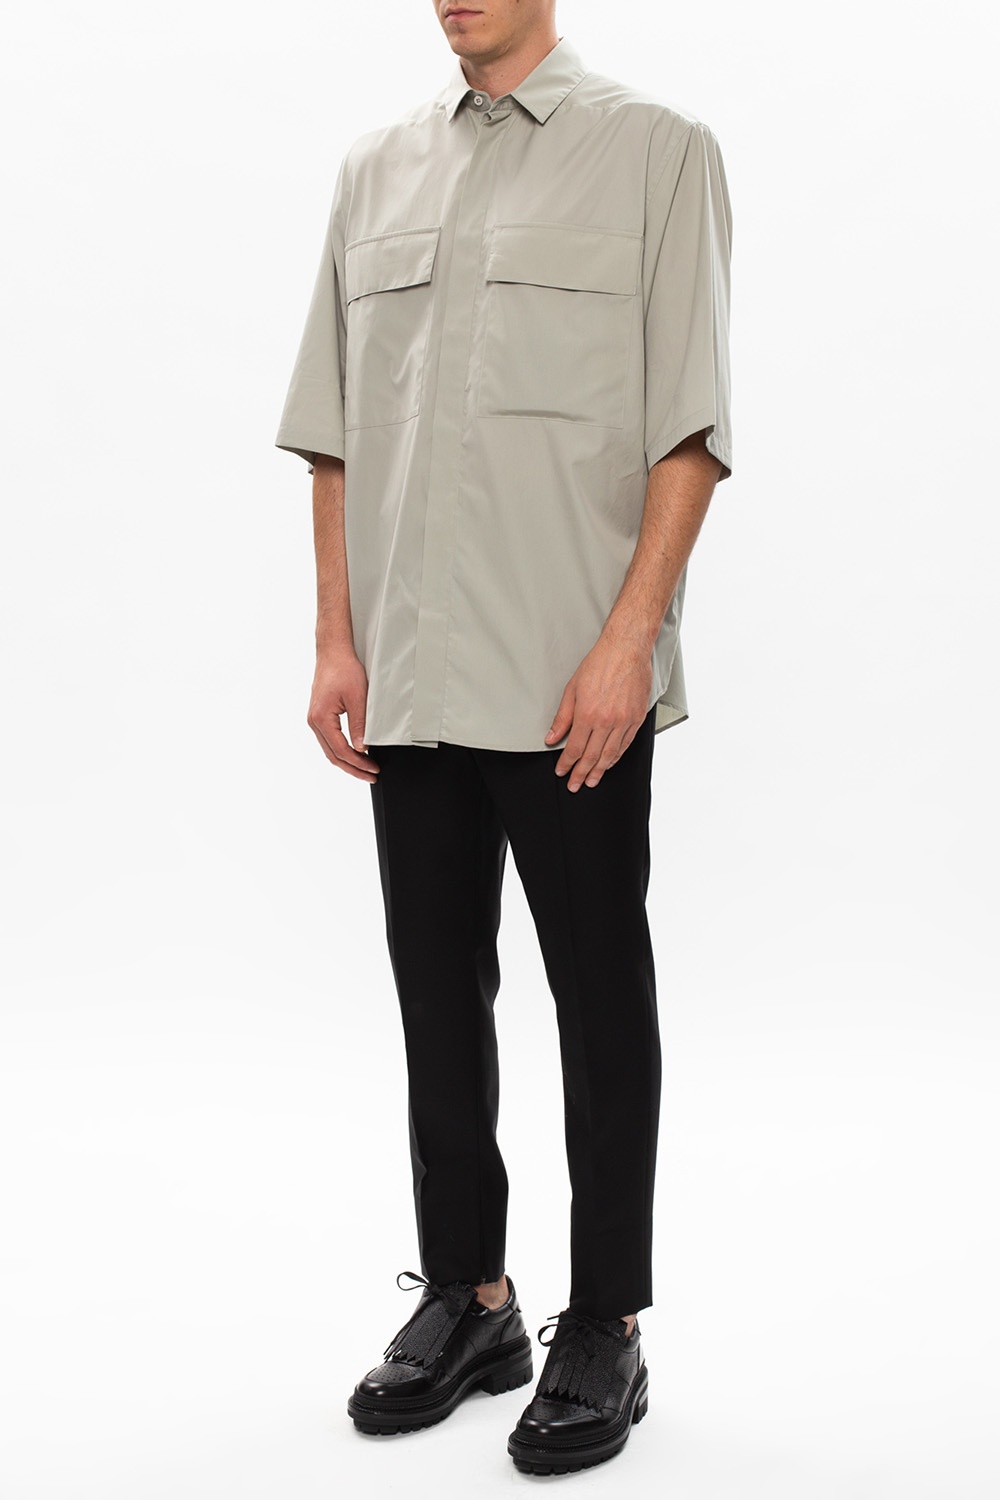 Fear Of God Zegna office-accessories usb caps cups Shirts